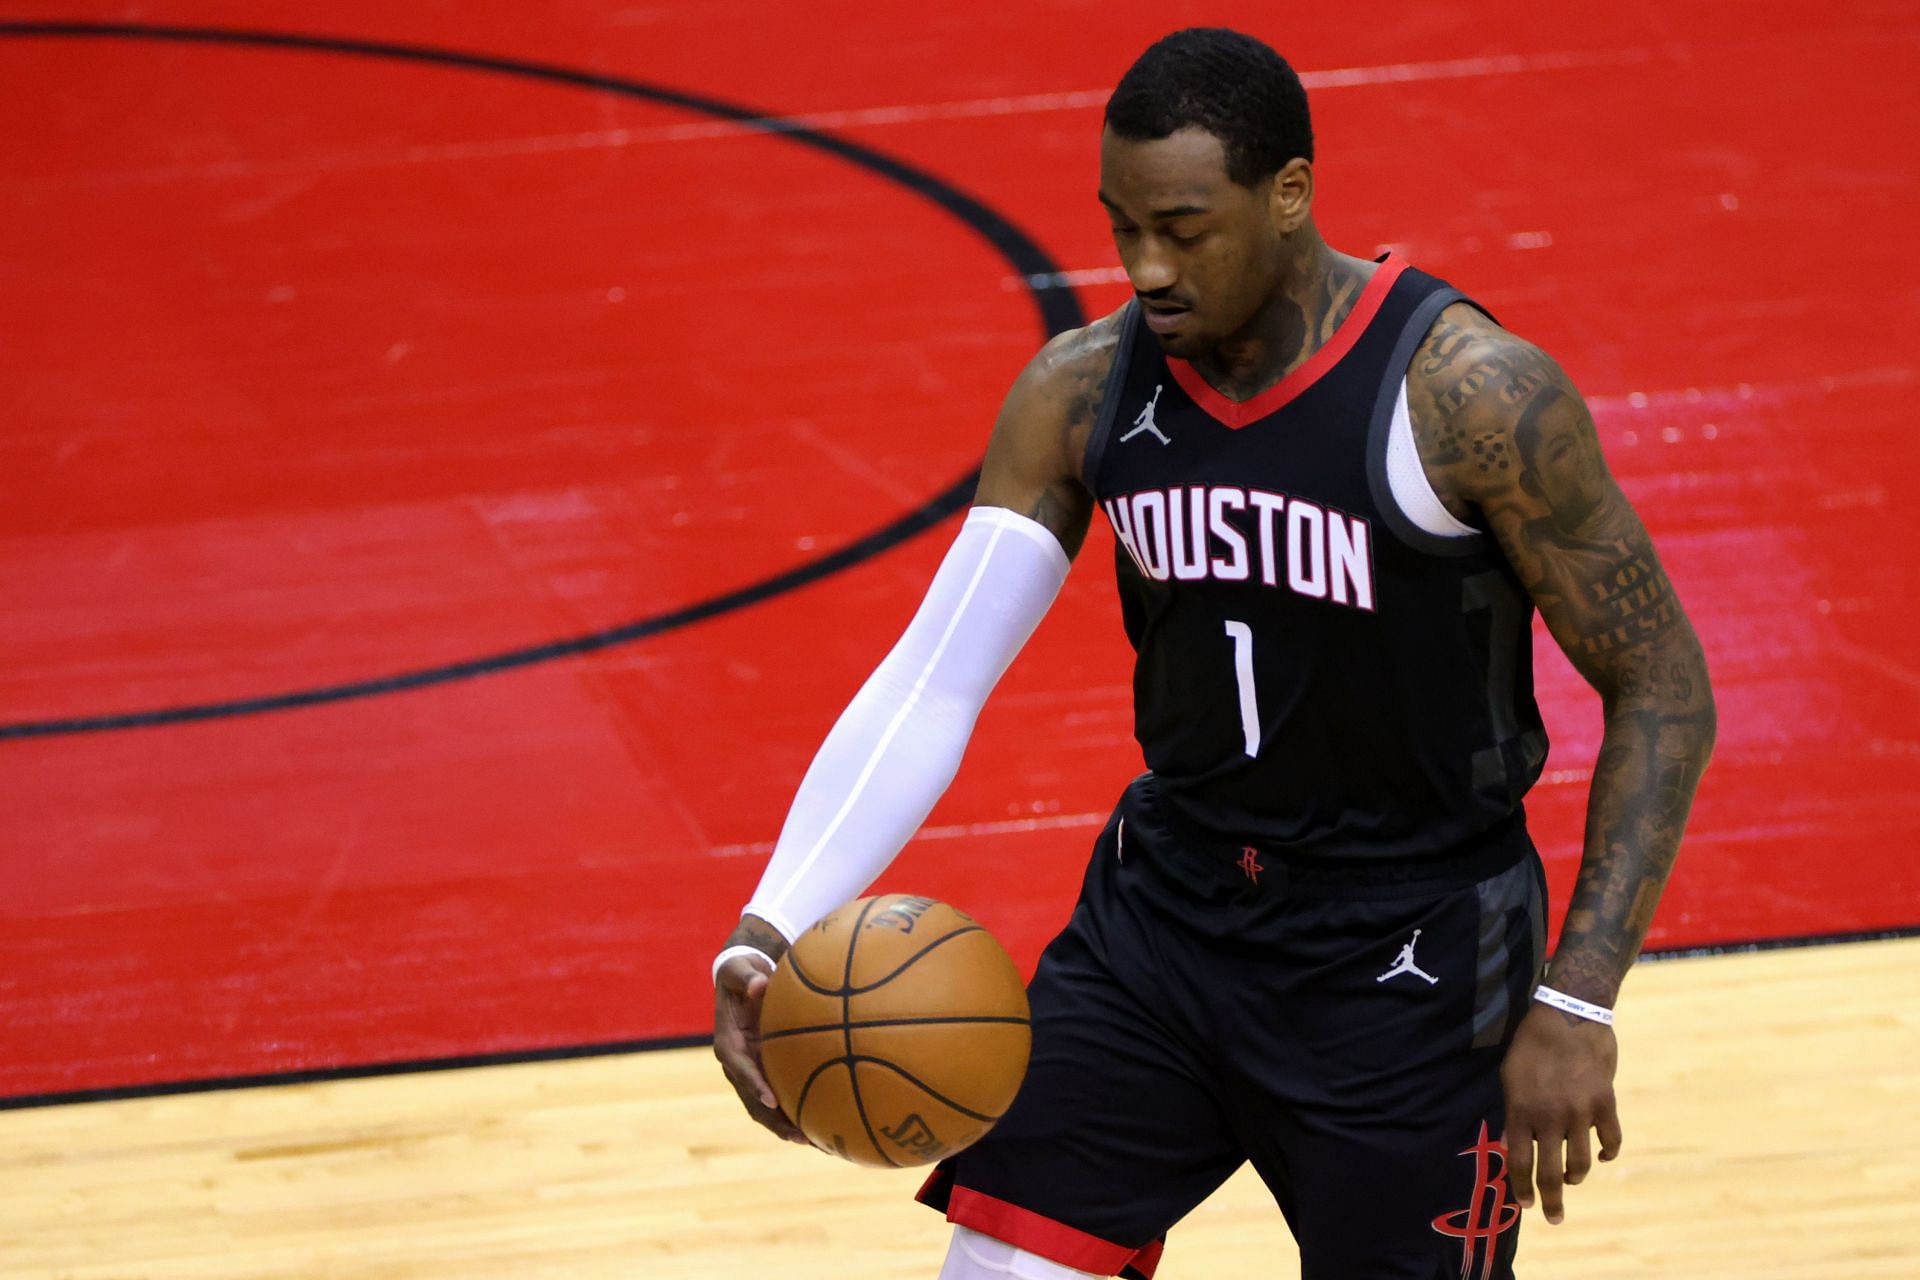 John Wall in action during A Miami Heat v Houston Rockets game in the 2020-21 season